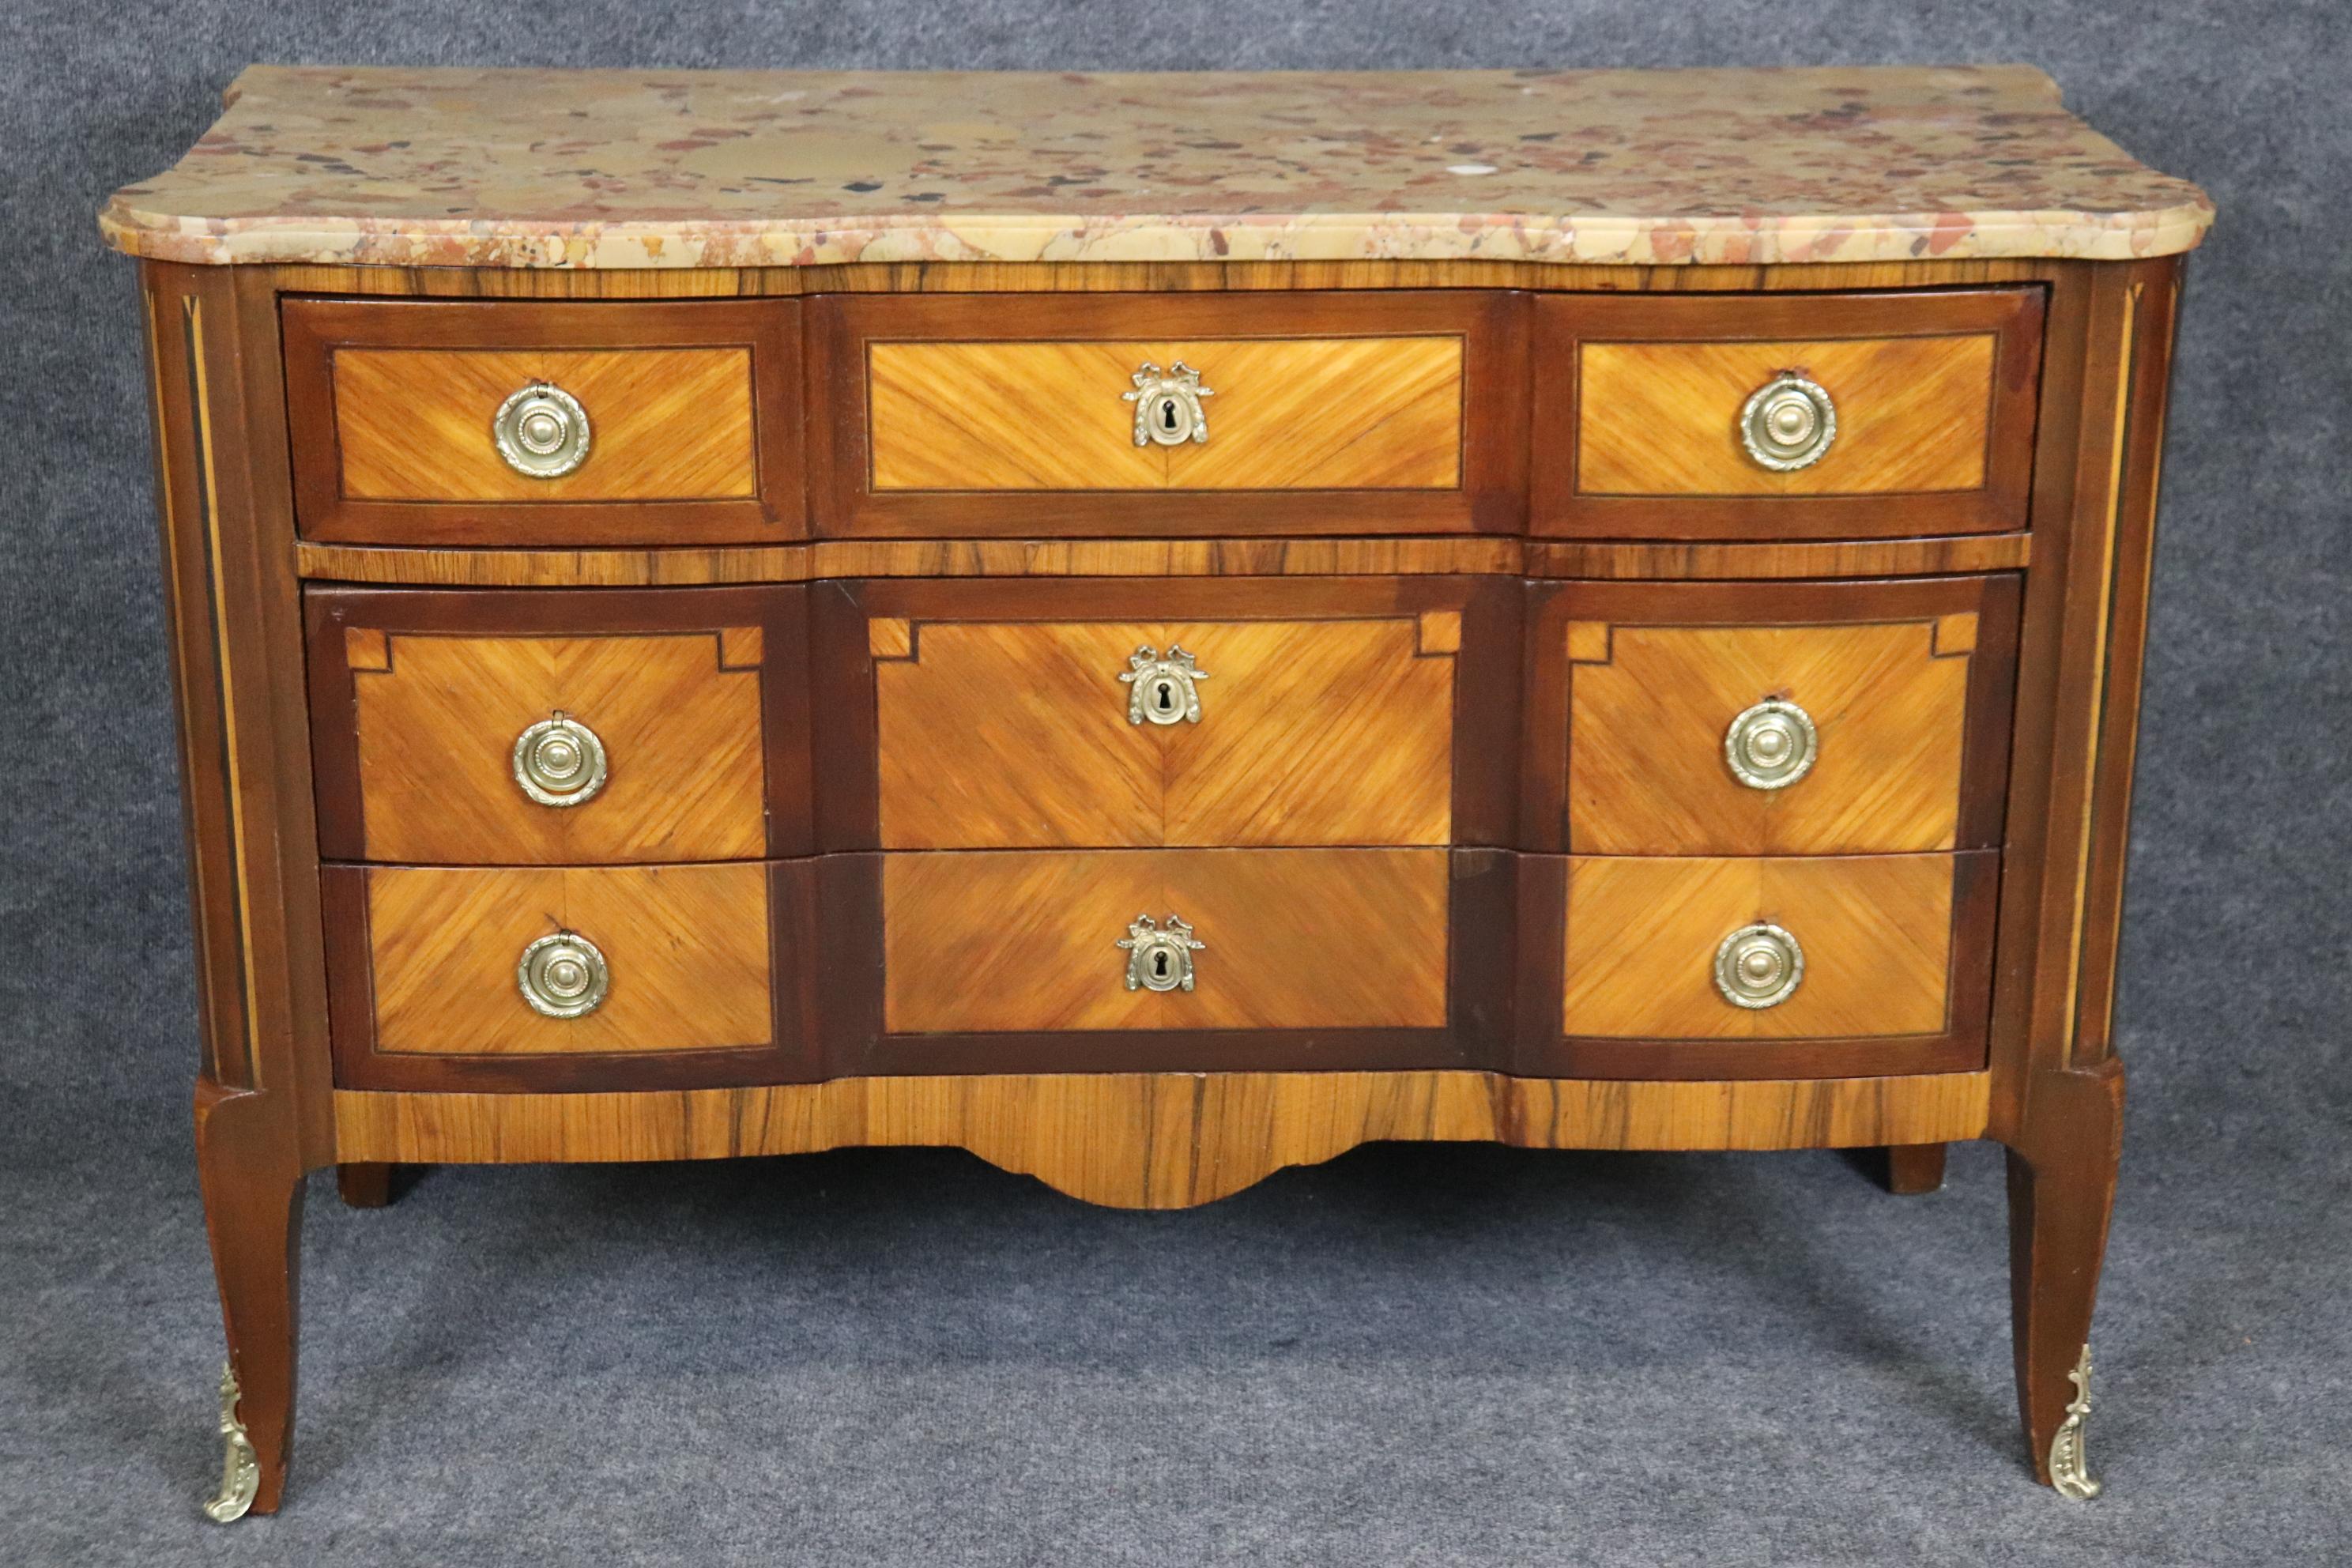 Dimensions: Height: 33 3/4 in Width: 49 1/4 in Depth: 21 in 

This antique French Louis XV style inlaid marble top commode, dresser, chest of drawers is a great example of quality French furniture! If you look at the photos provided, you will see